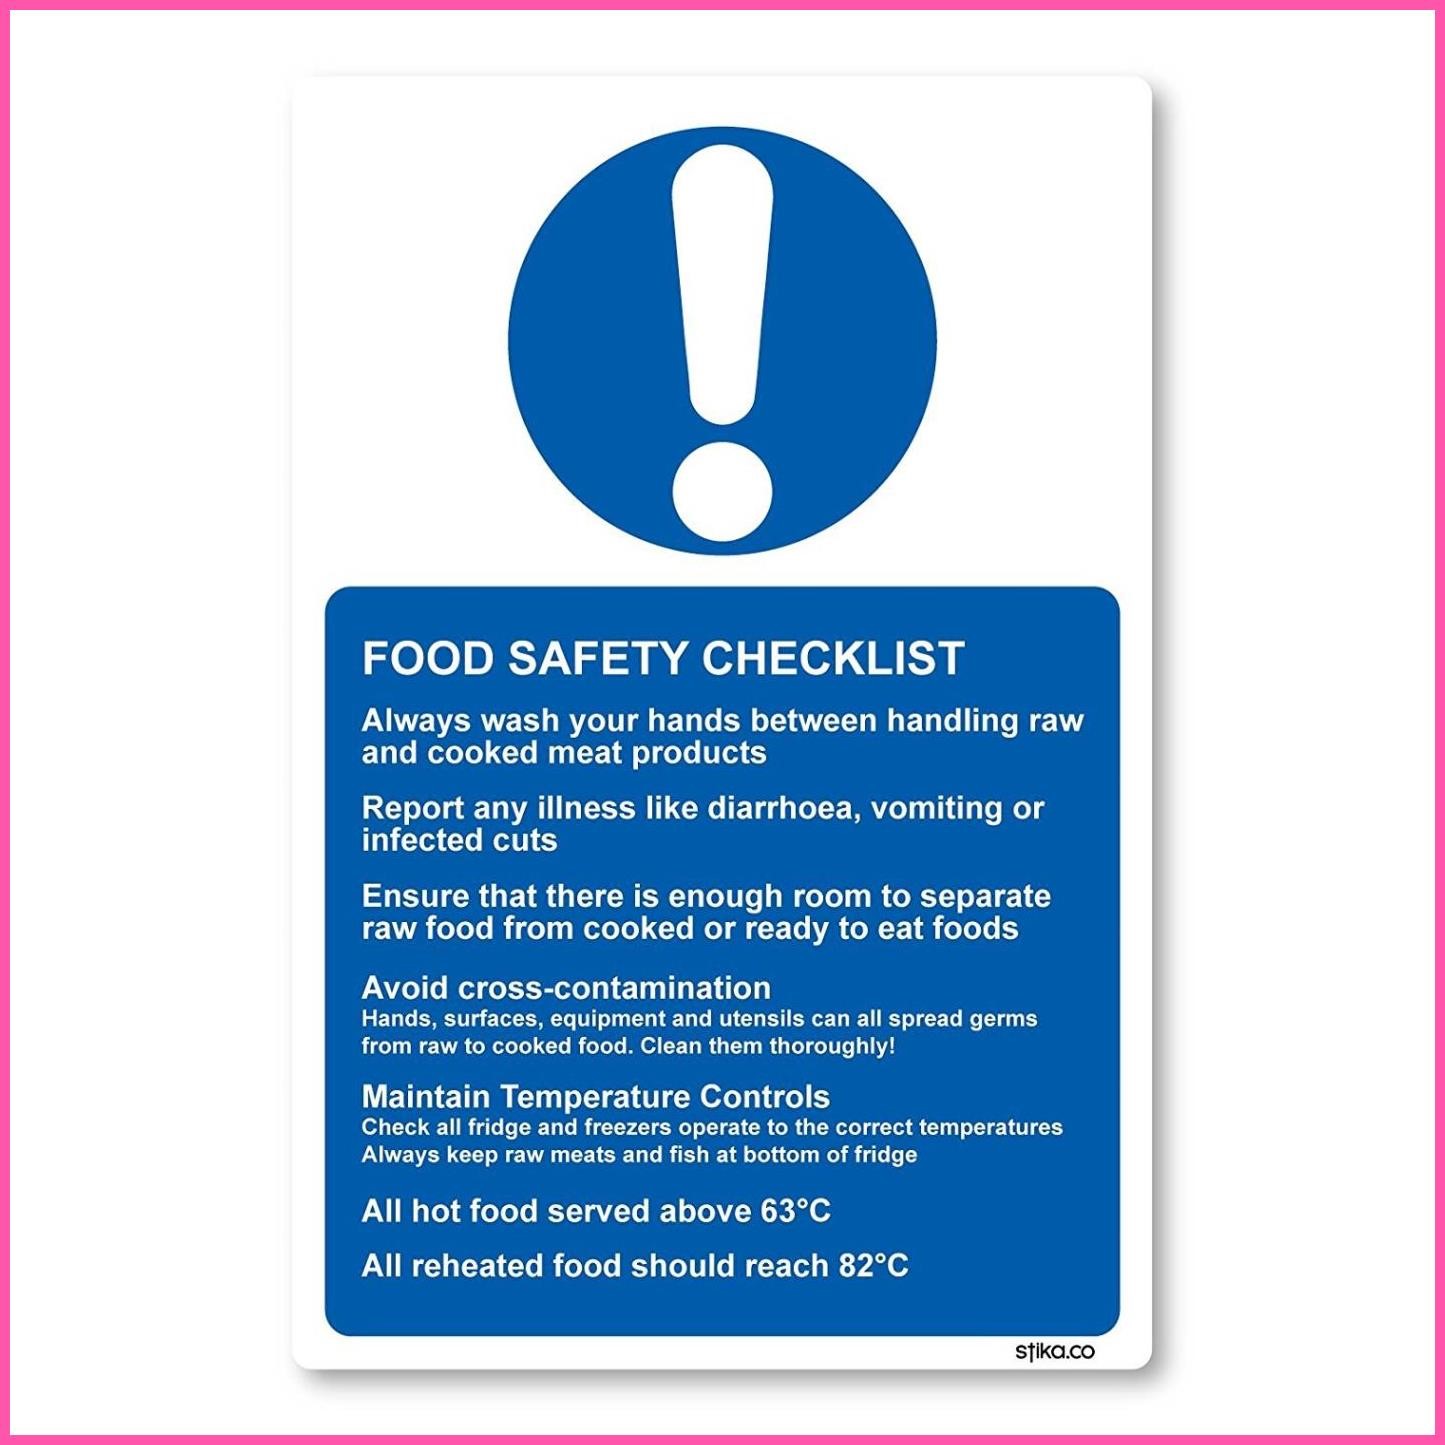 16 Haccp Checklist For Kitchen Colour Coded Chopping Boards Sign A xmm Kitchen Safety Self  Haccp,Checklist,Kitchen